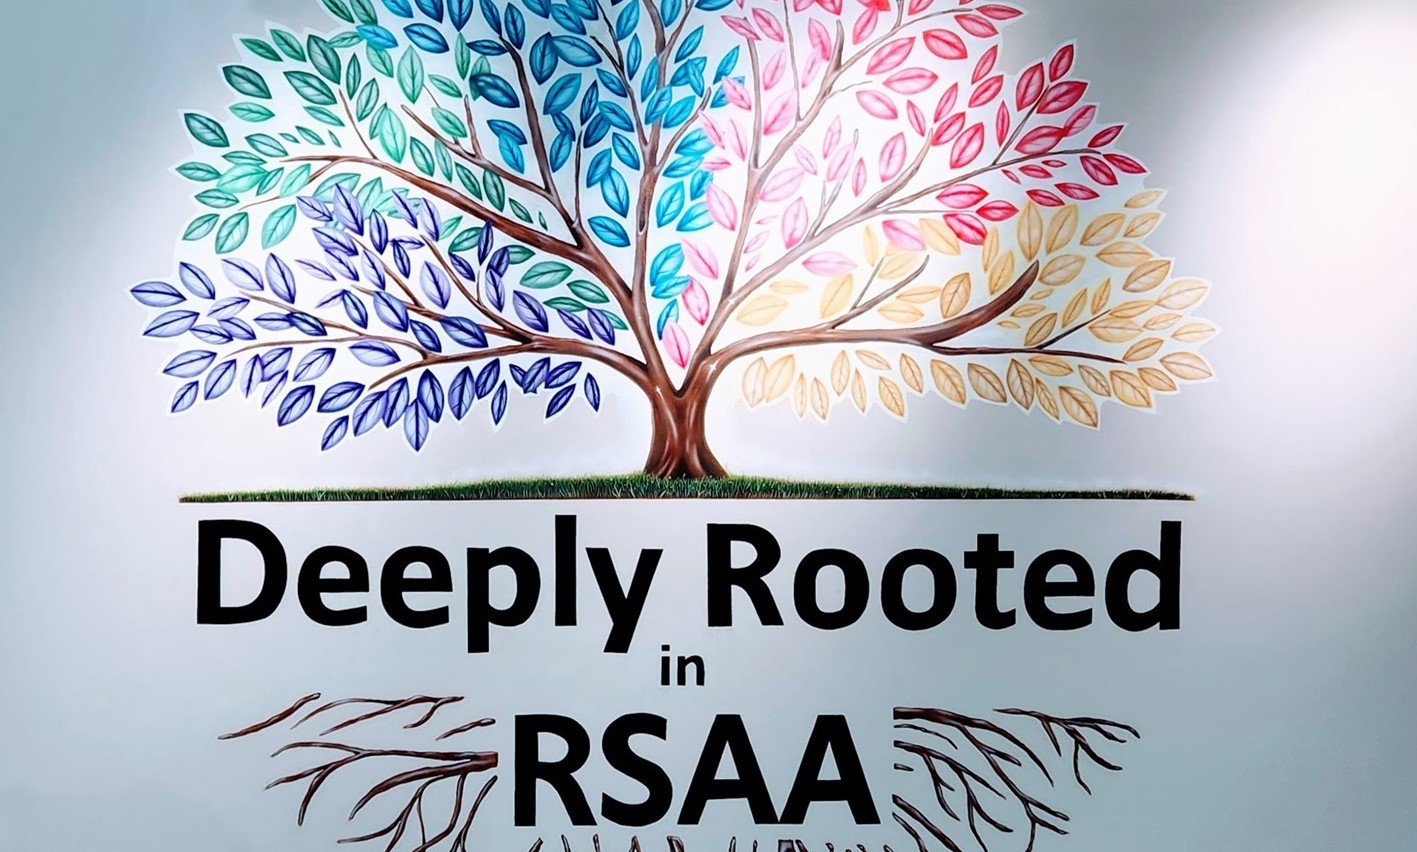 Deeply Rooted Tree in RSAA Lobby